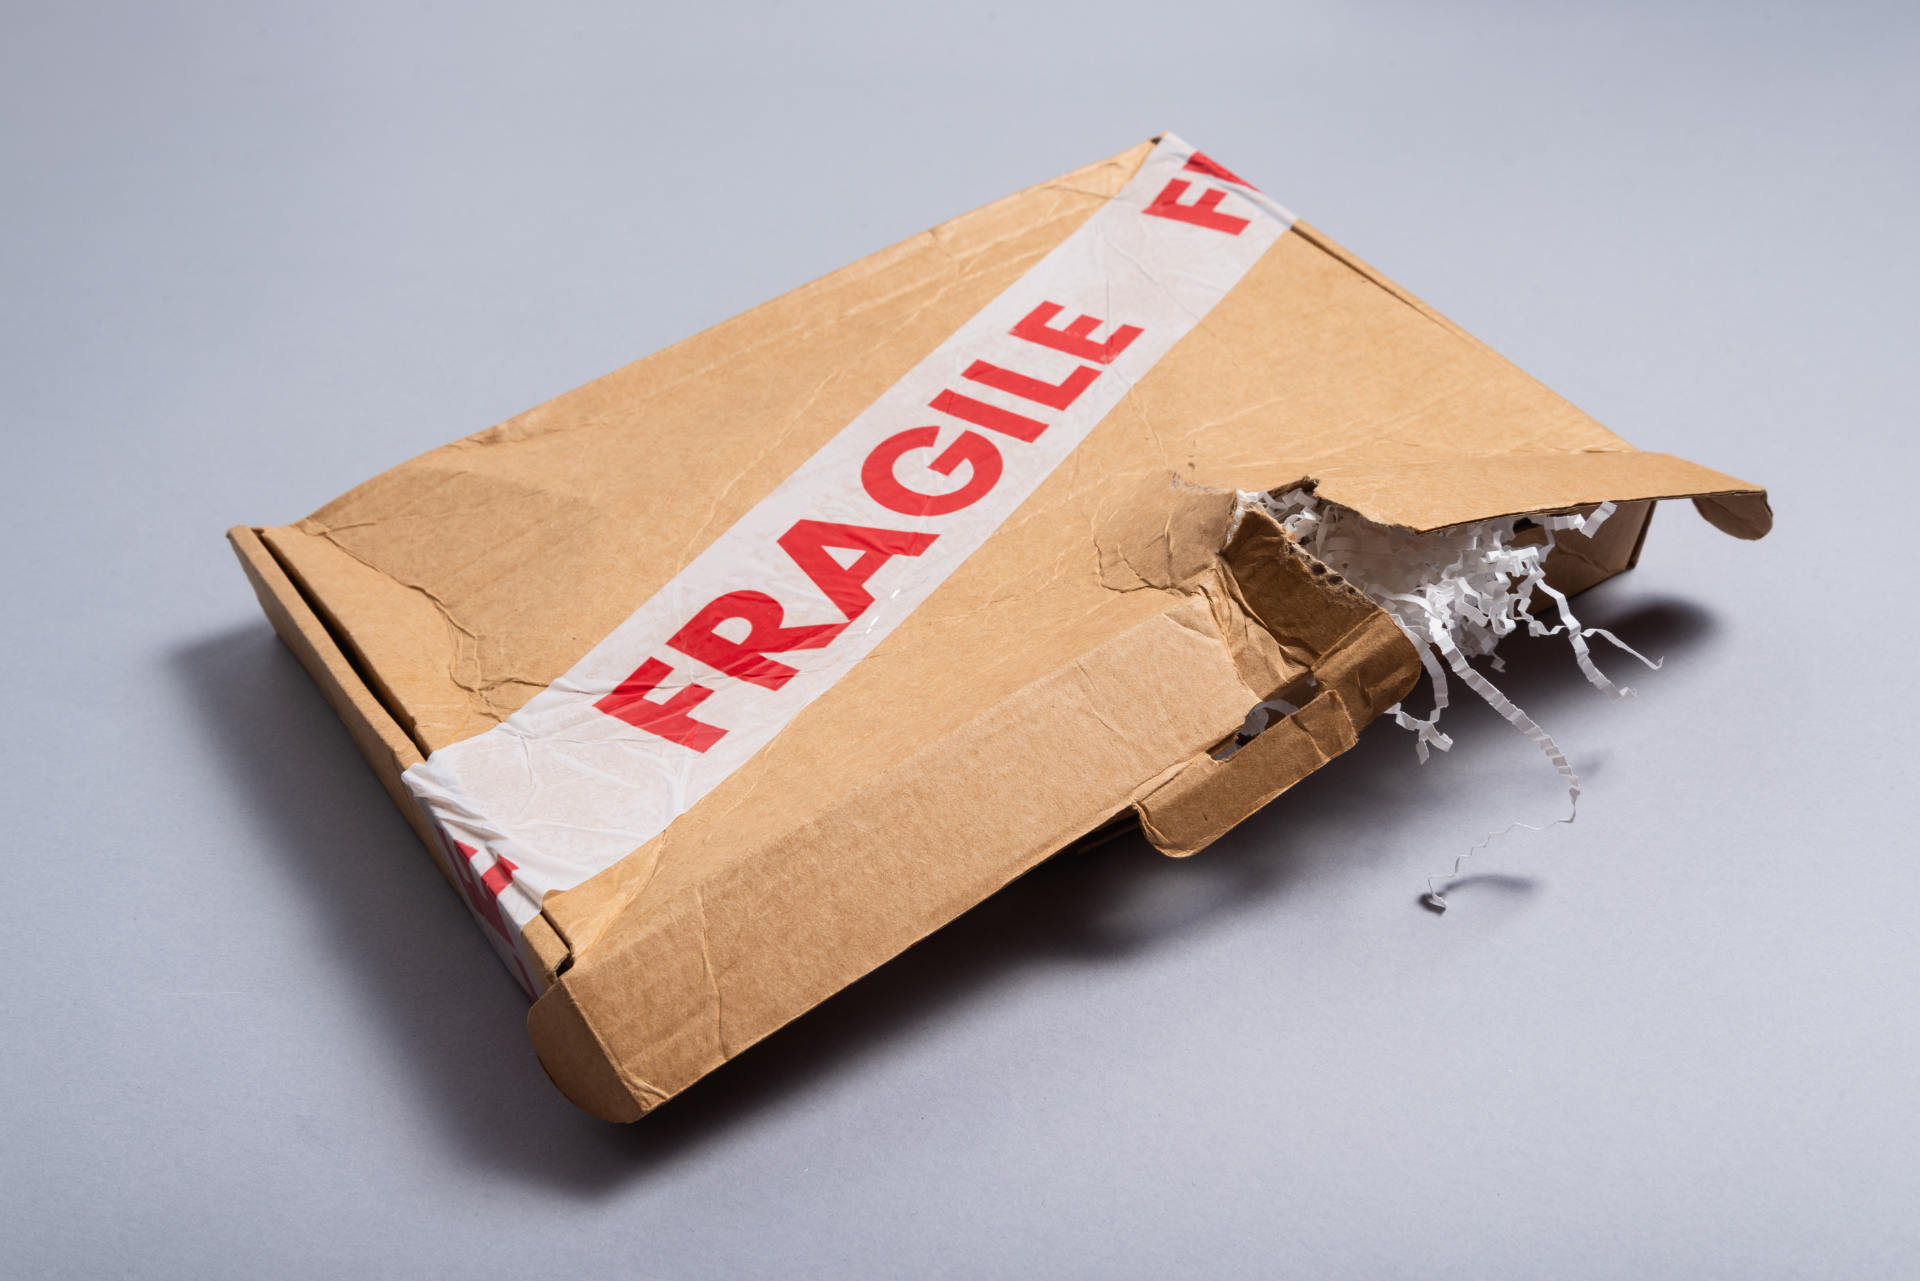 A guide to storing your fragile items safely